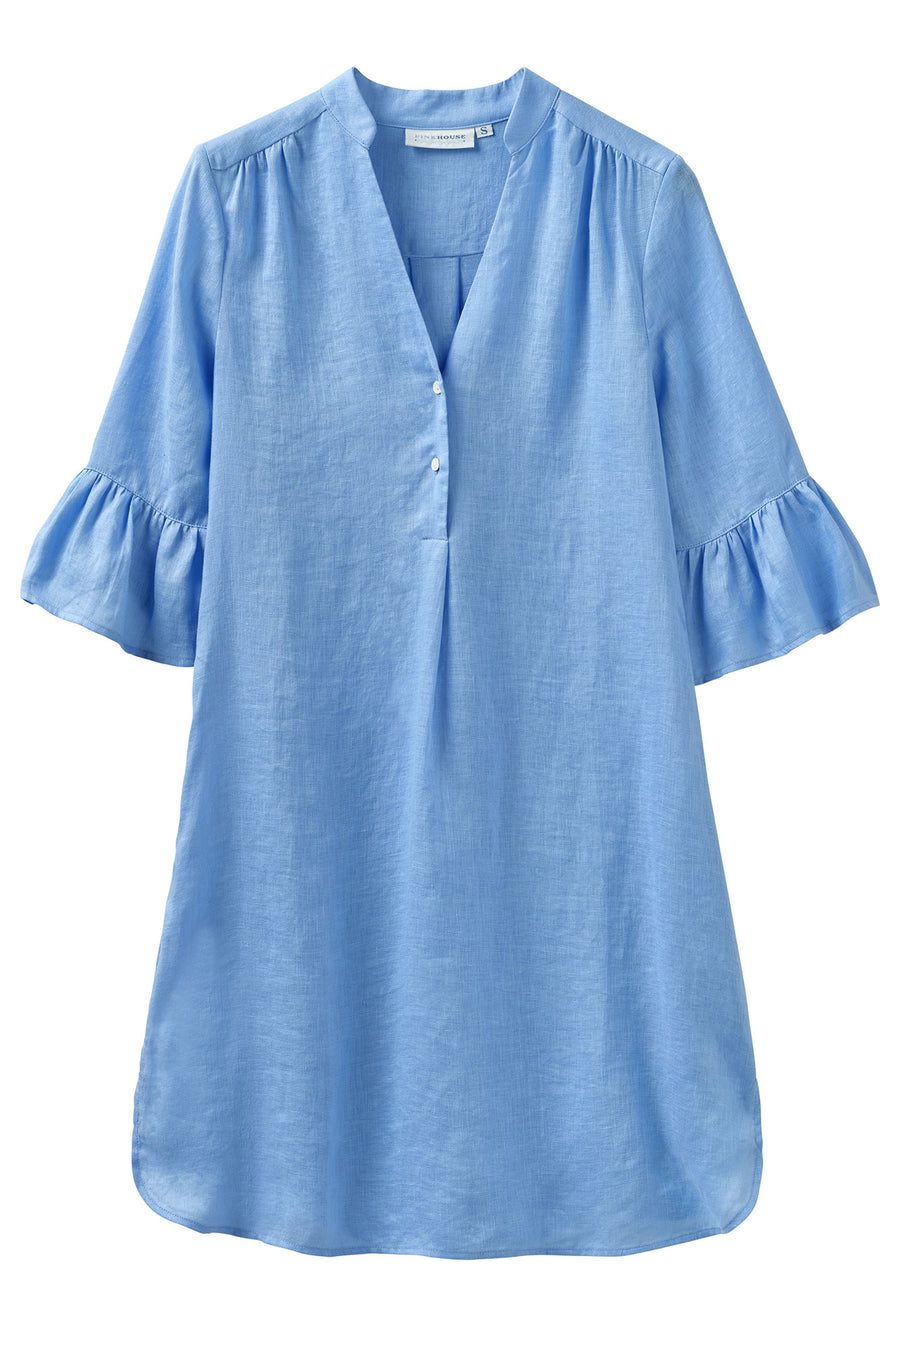 Summer lifestyle womens pure linen Decima dress with gathered sleeves in plain French blue